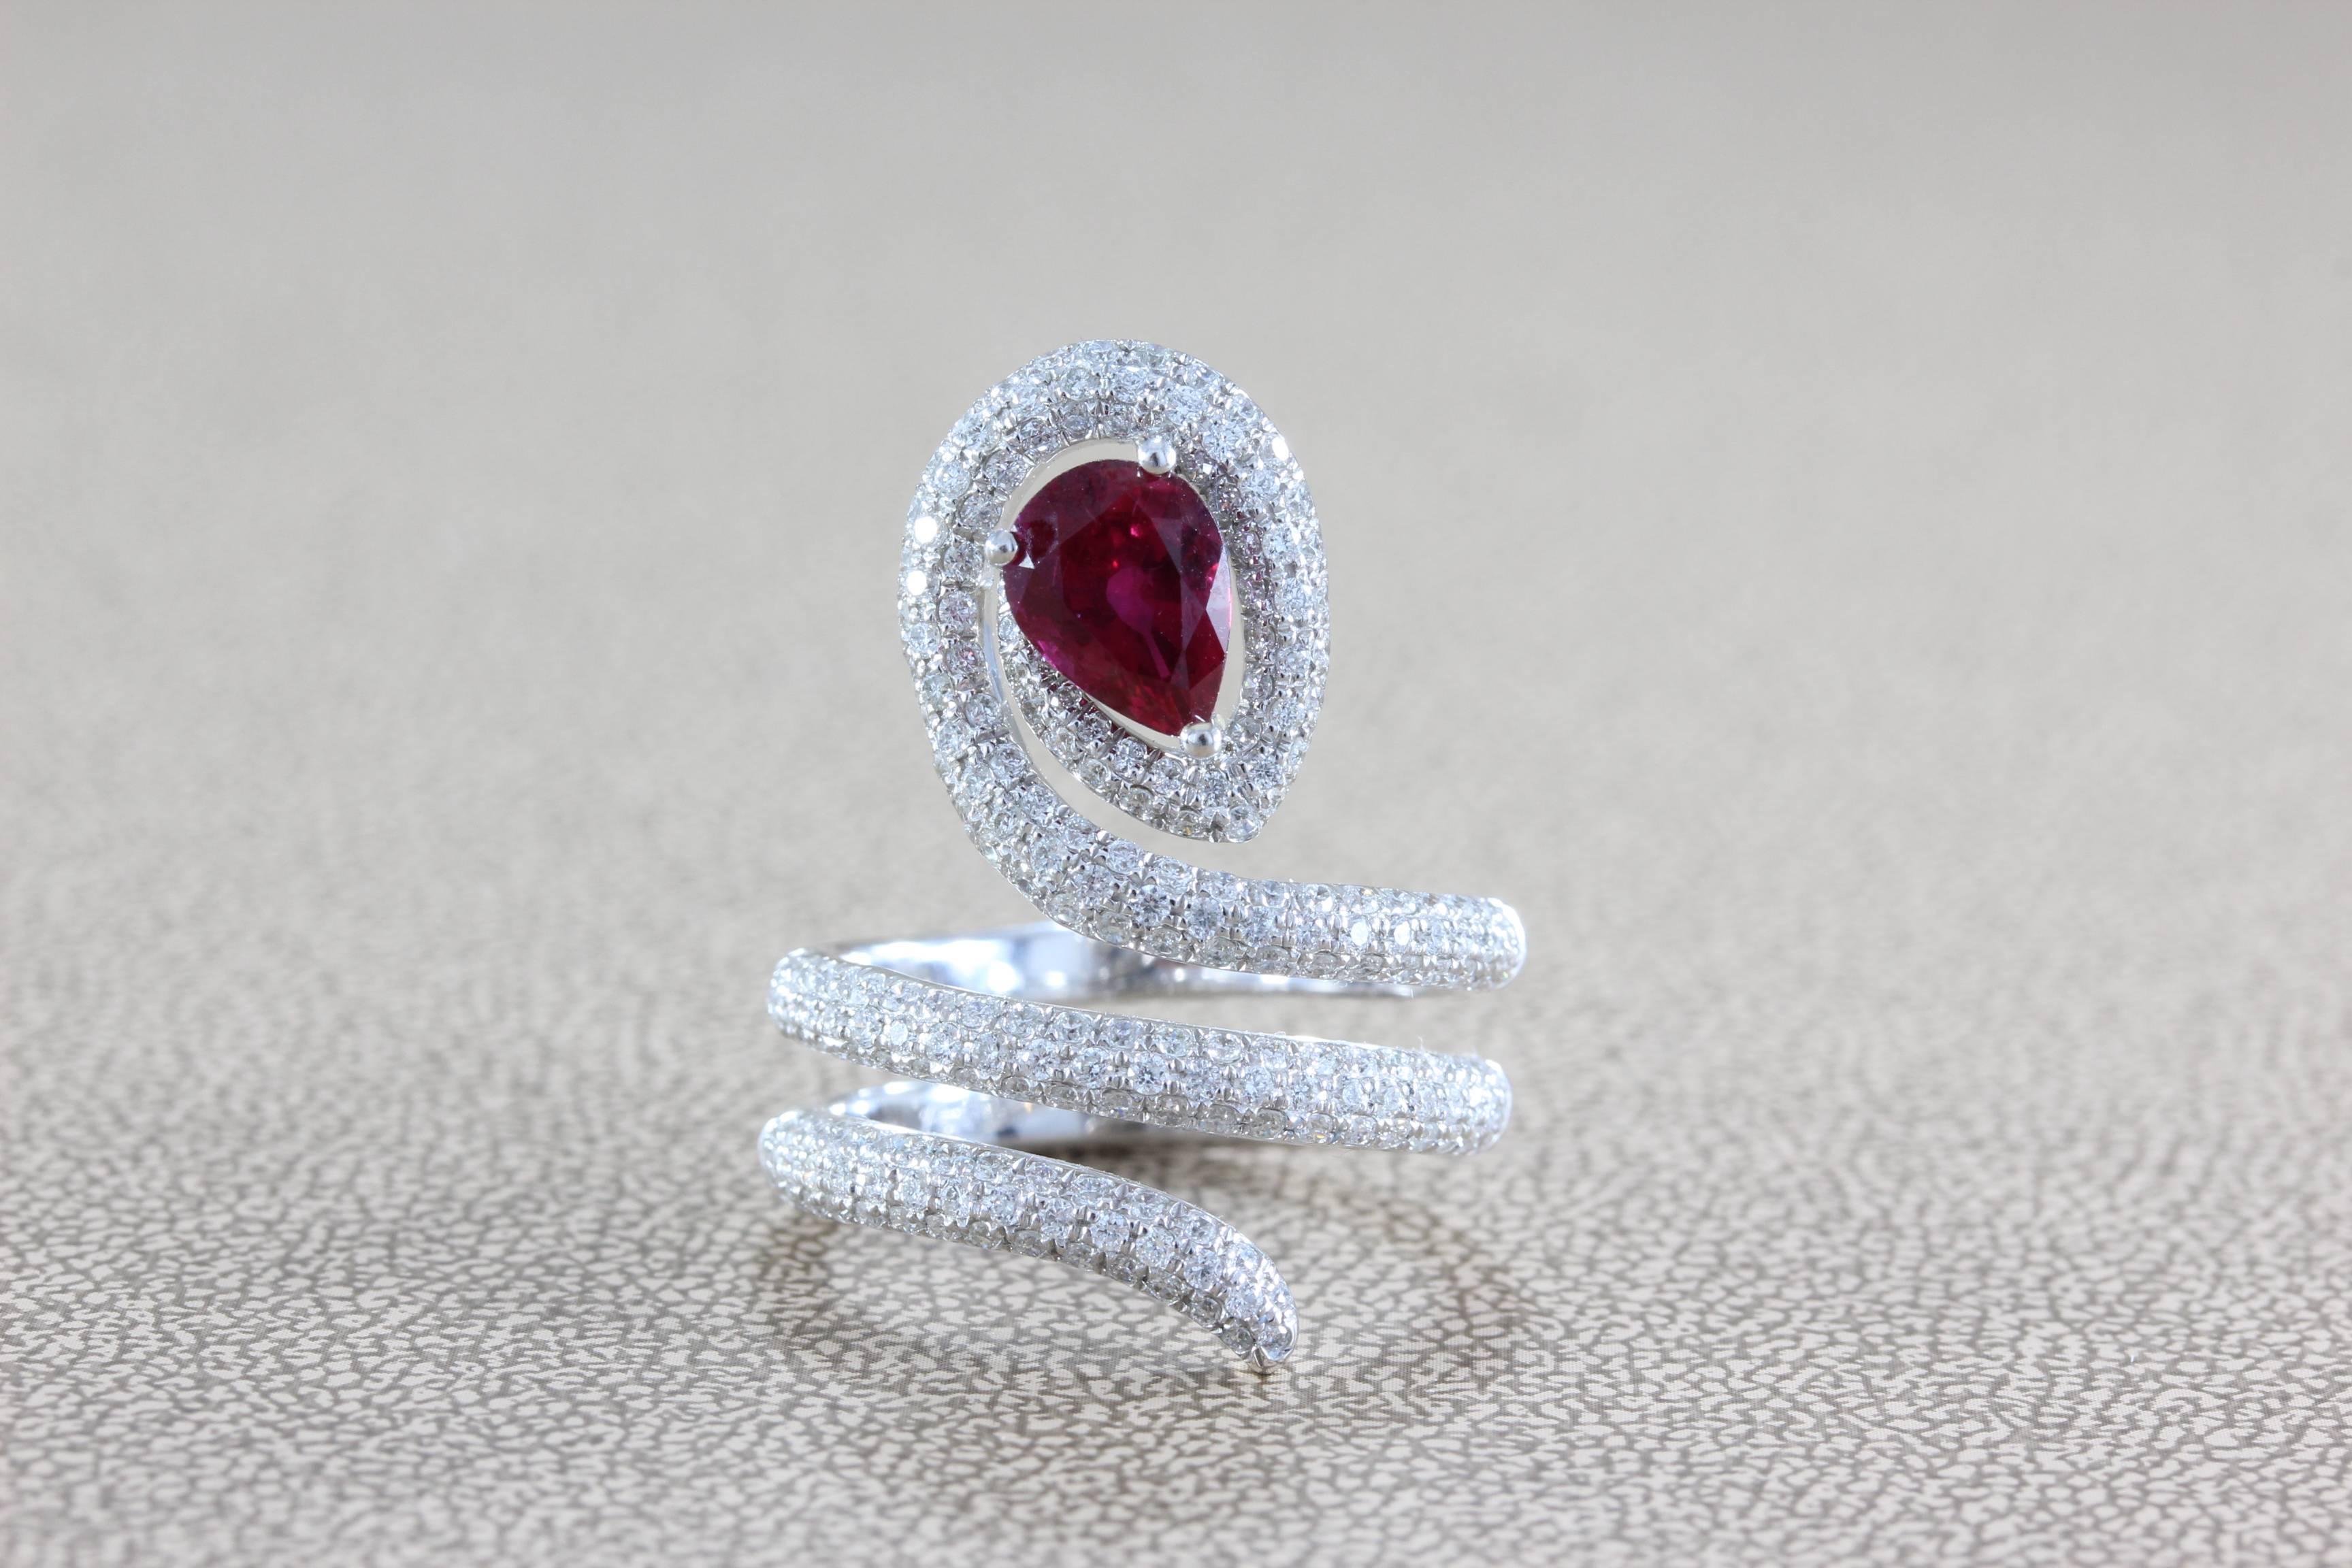 Original this snake inspired ring features a GIA Certified 1.51 carat pear shape vivid red ruby. With a great color tone and high level of color saturation, this eye clean ruby is of the highest quality. Accenting the center stone are 1.29 carats of